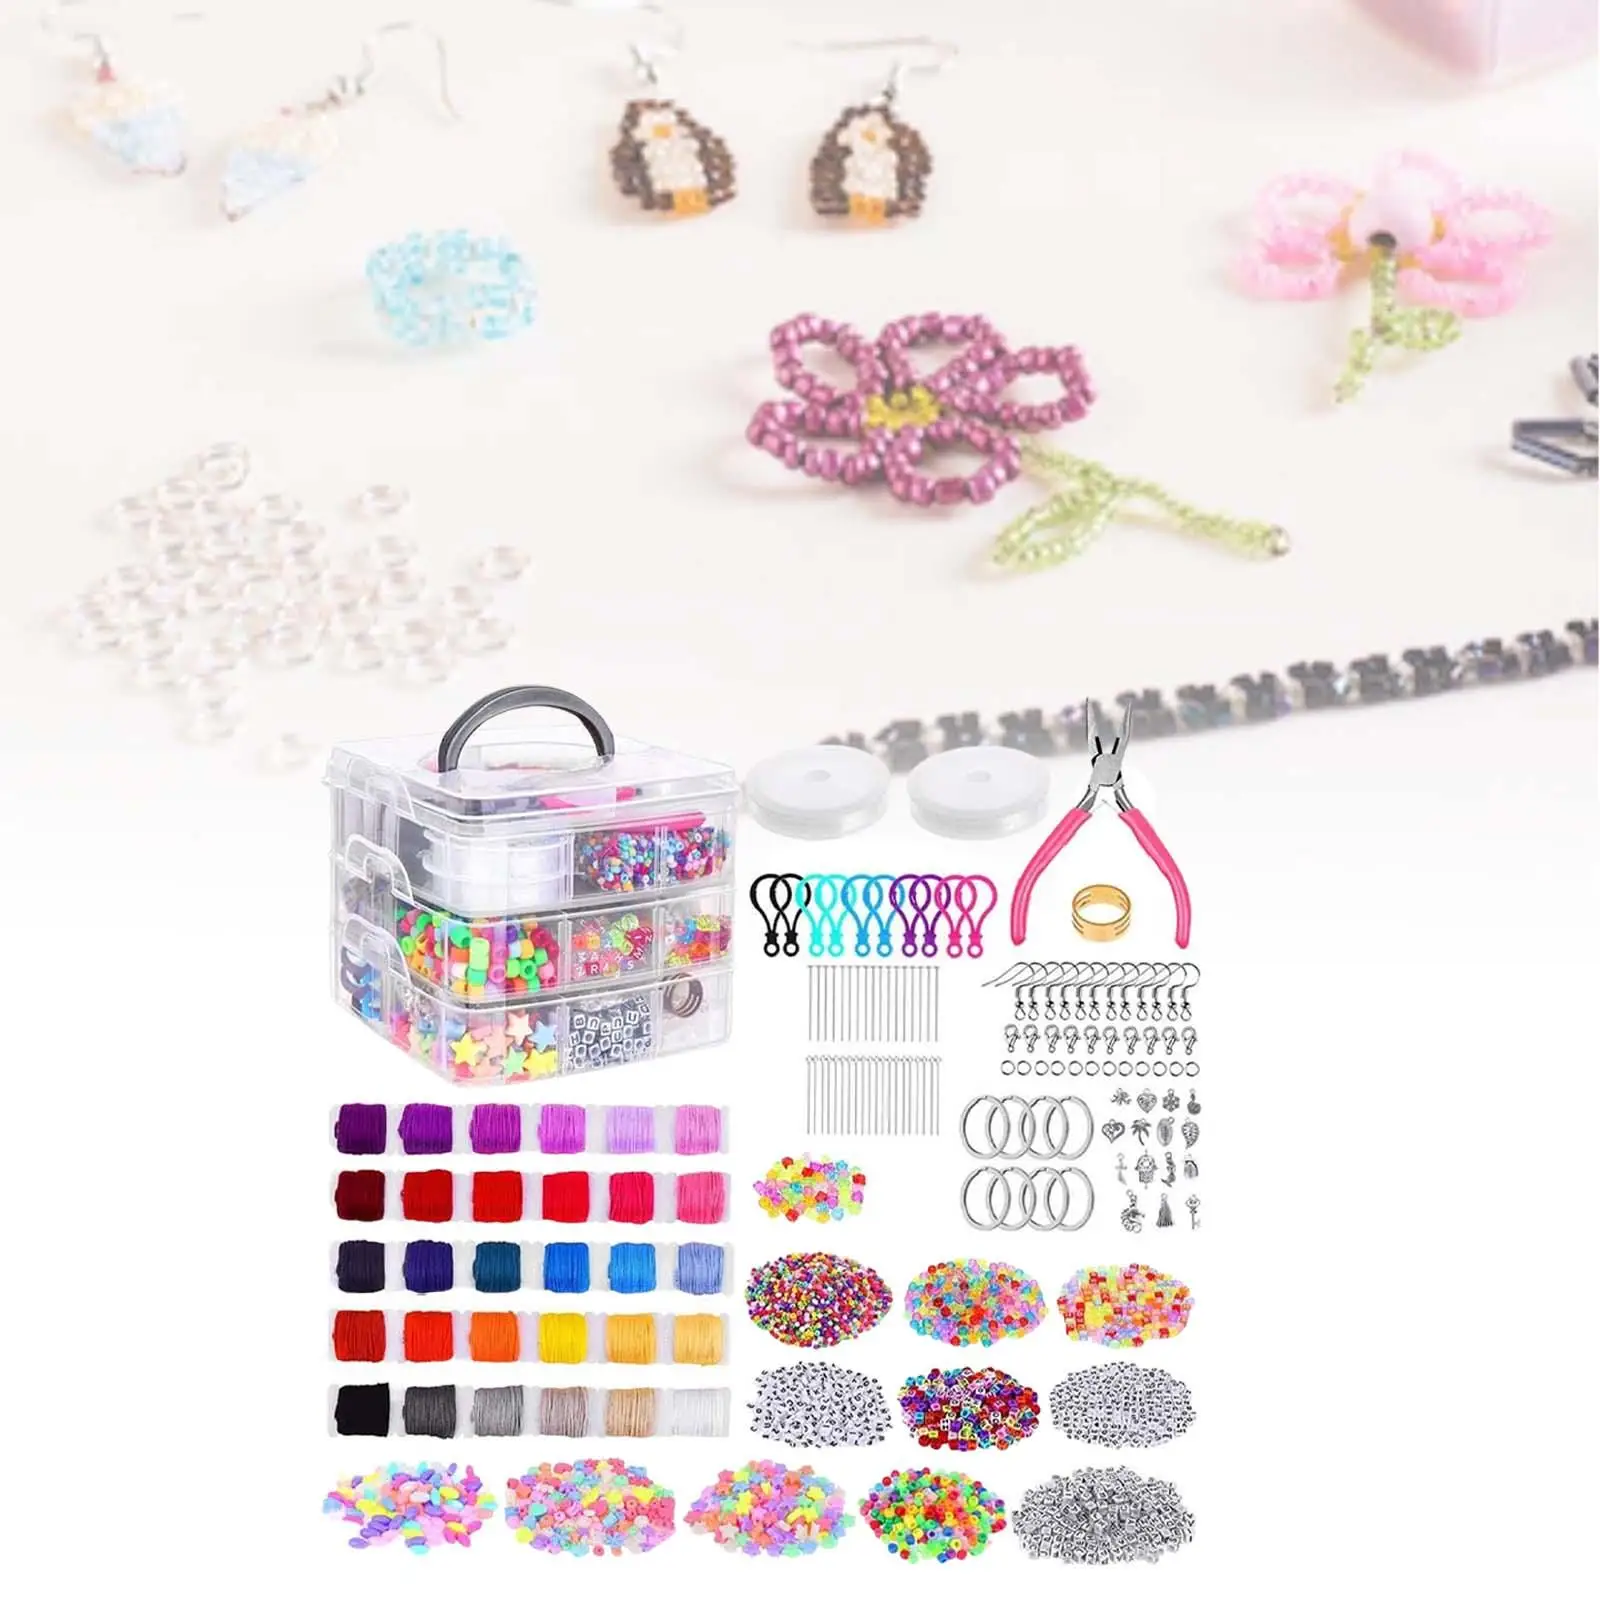 Peirich Jewelry Making Bead Kits, Includes 44 Colors Embroidery